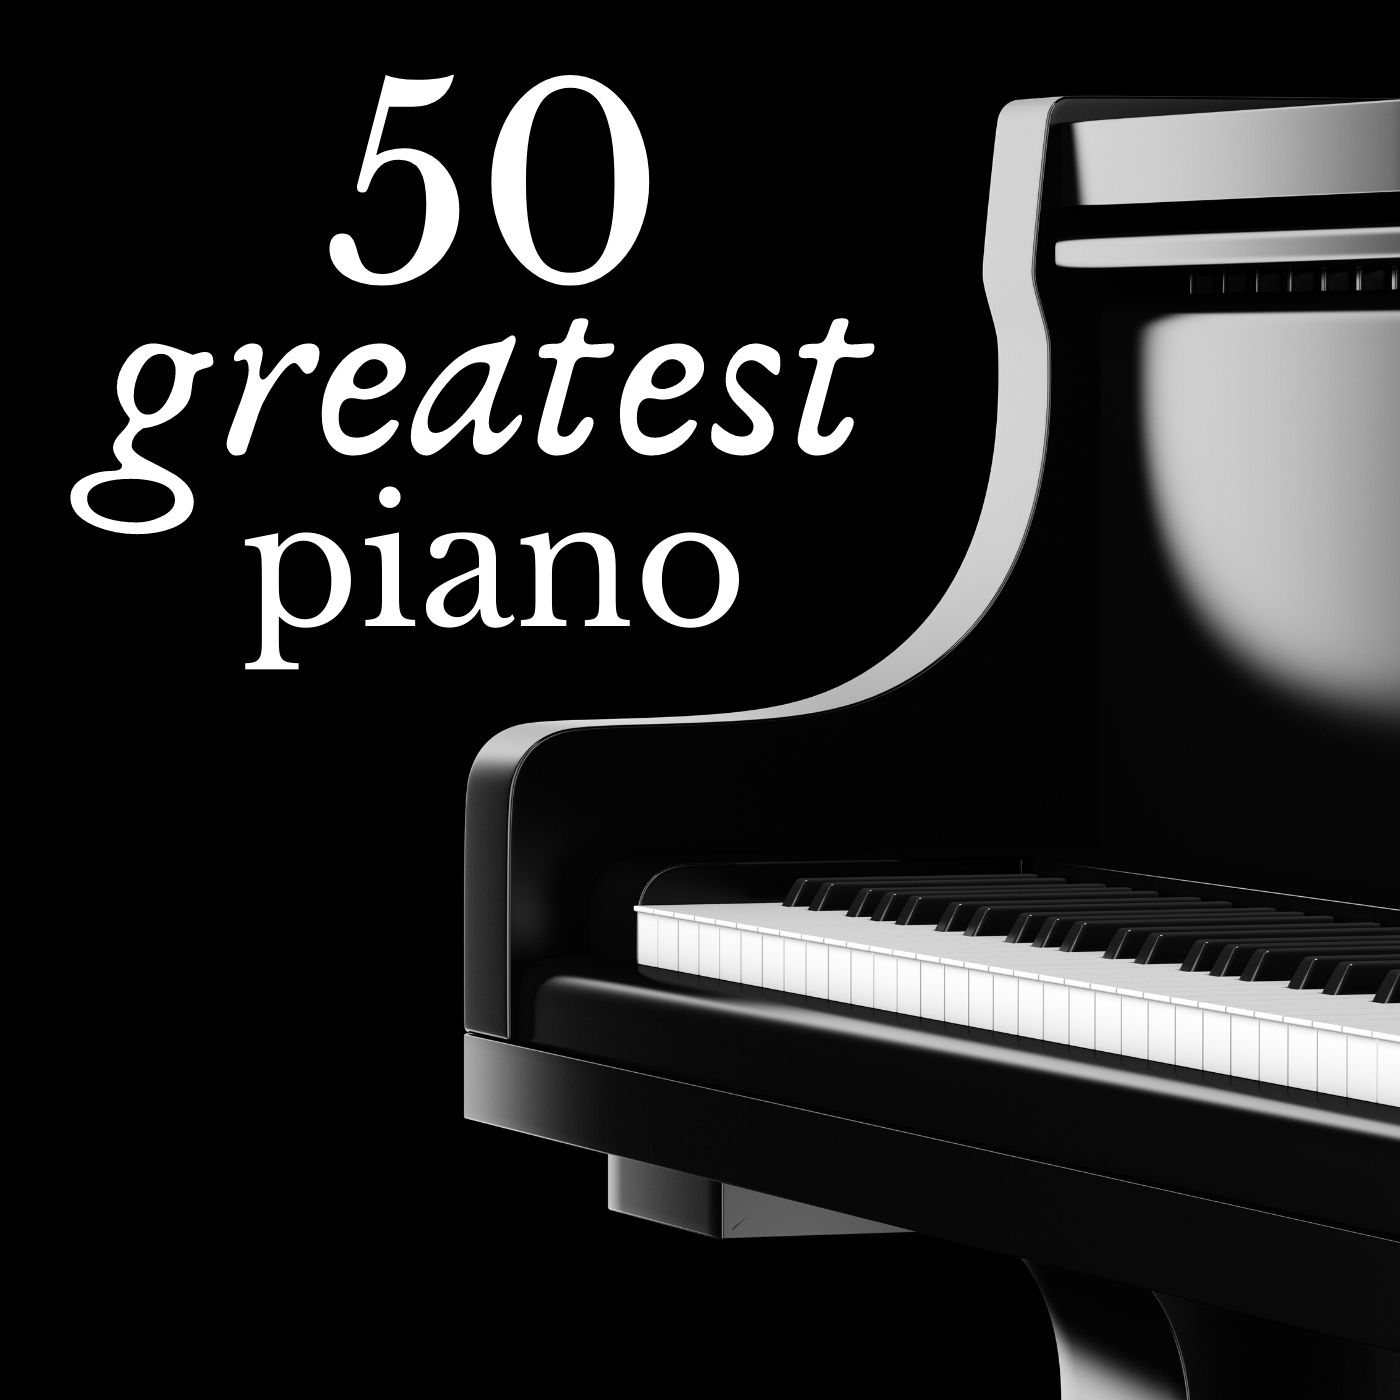 The 50 greatest Chopin recordings